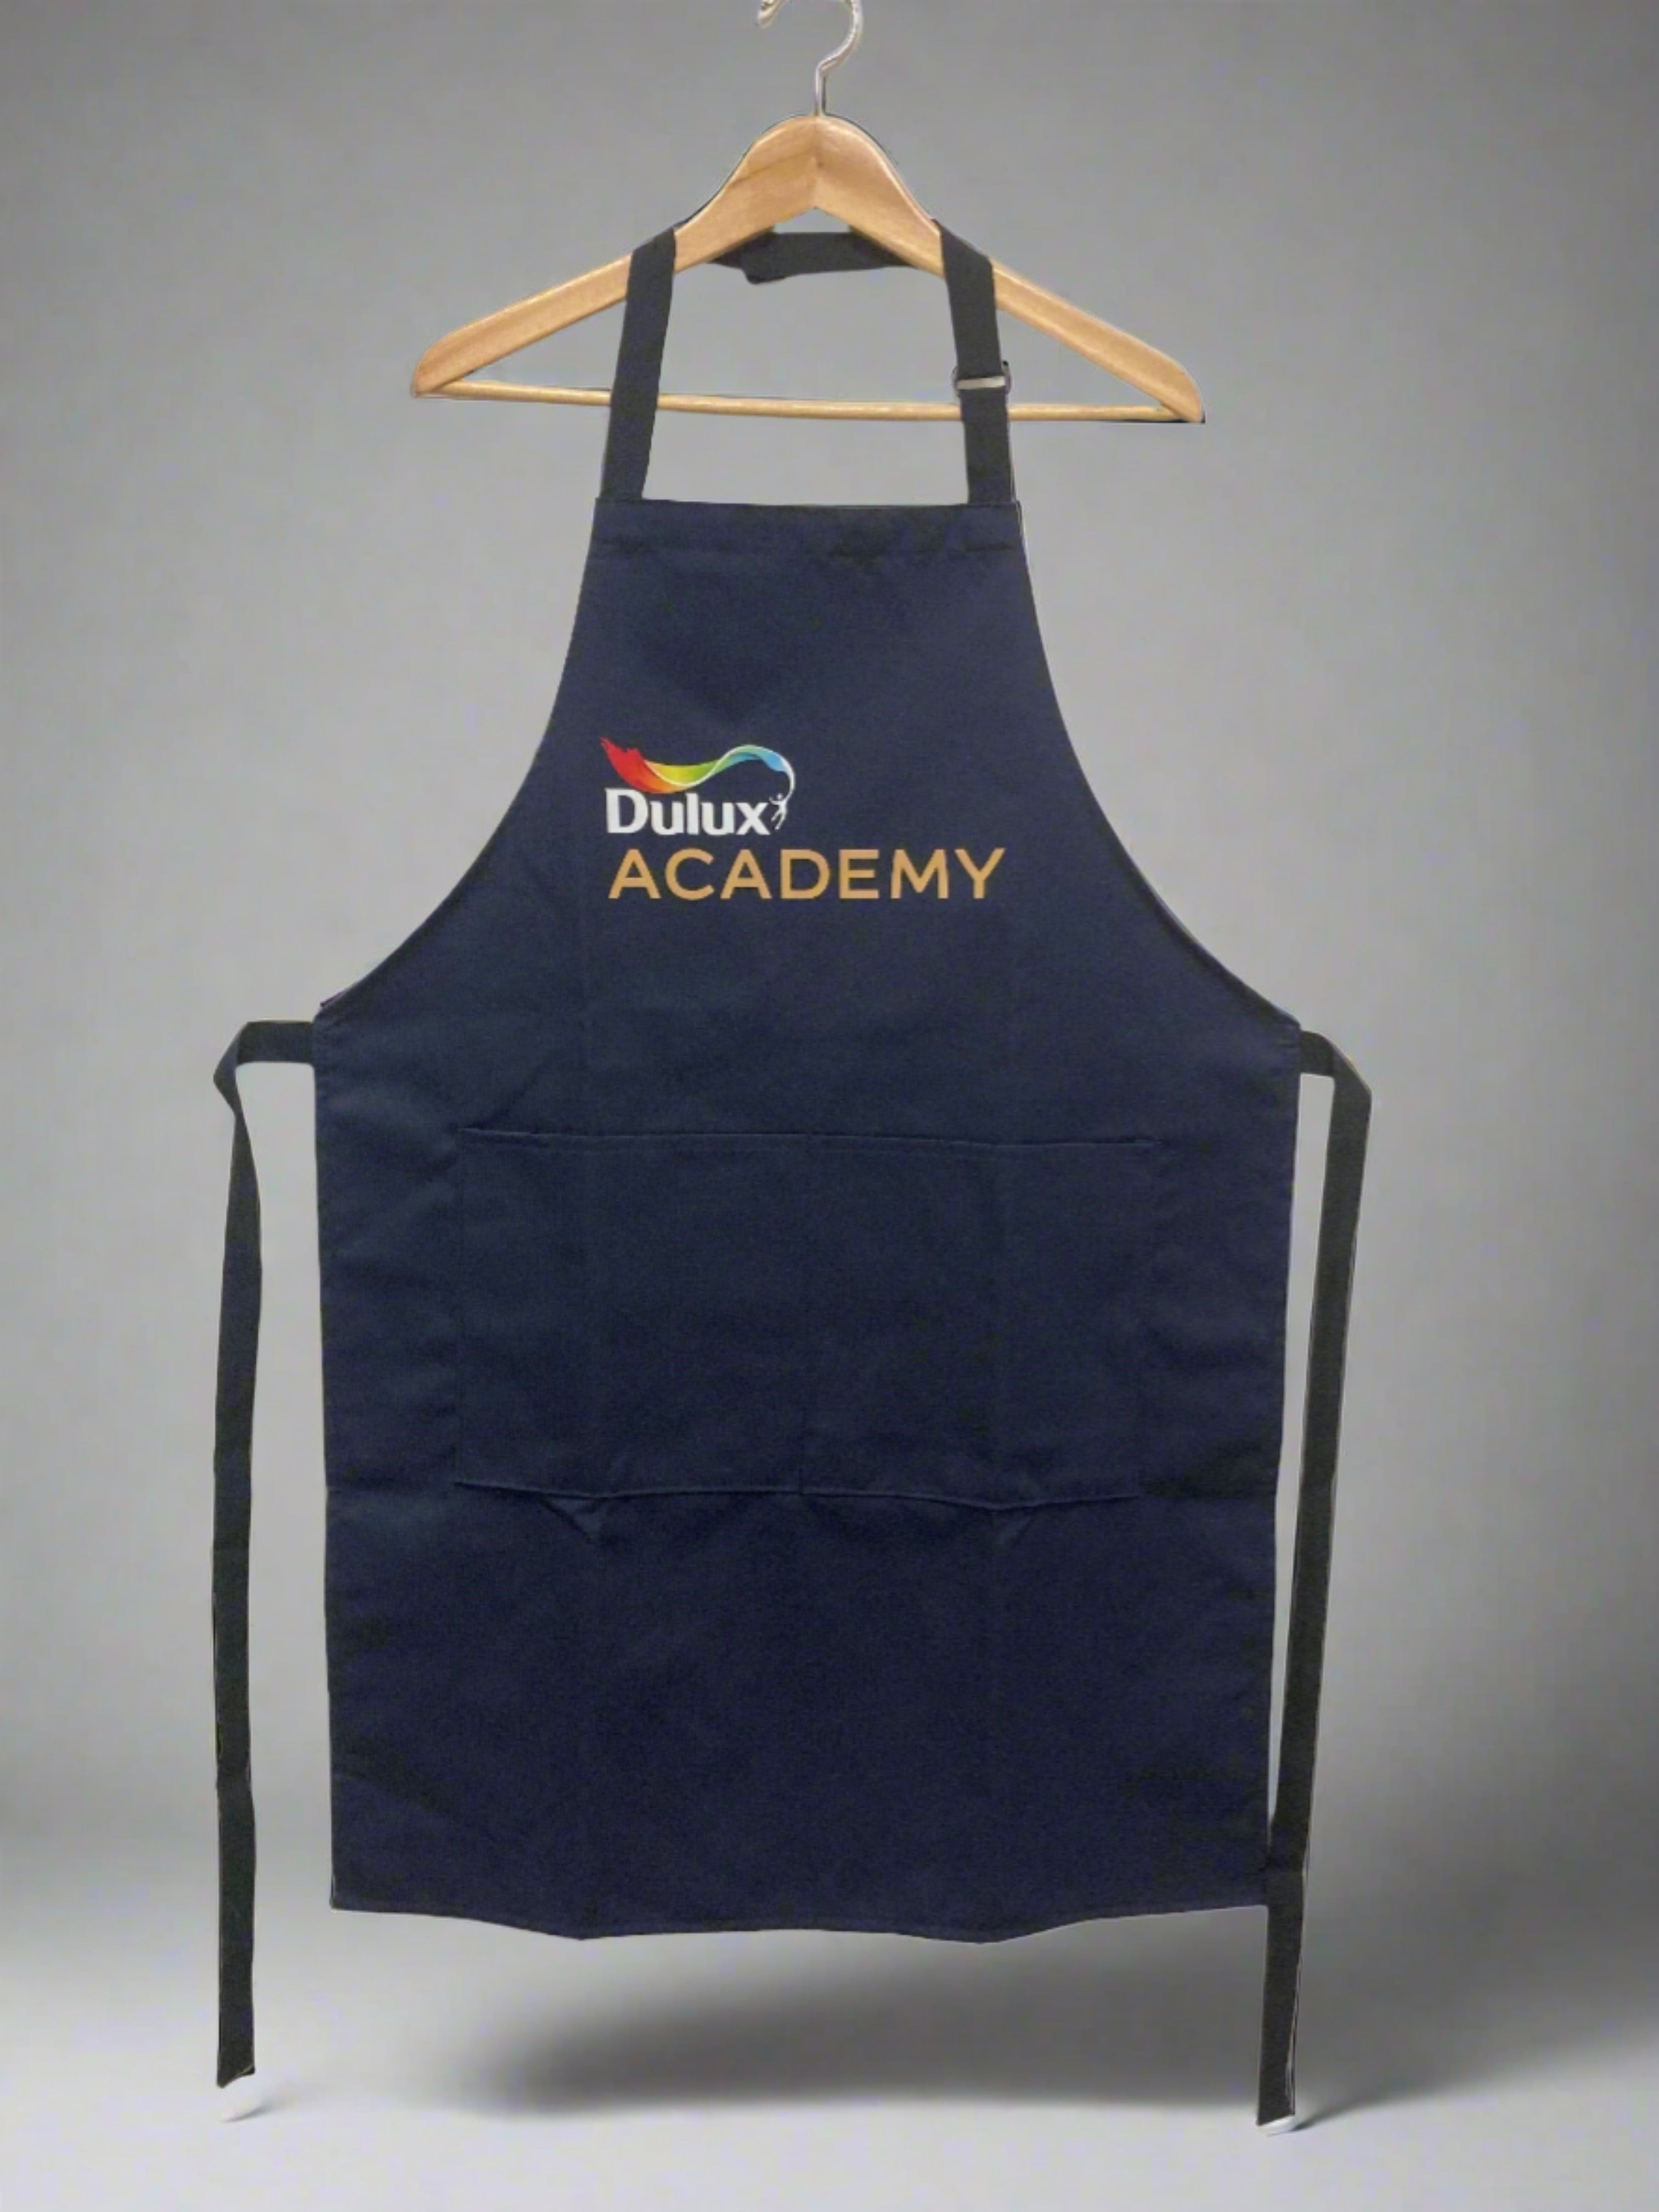 Dulux Academy branded Systainer